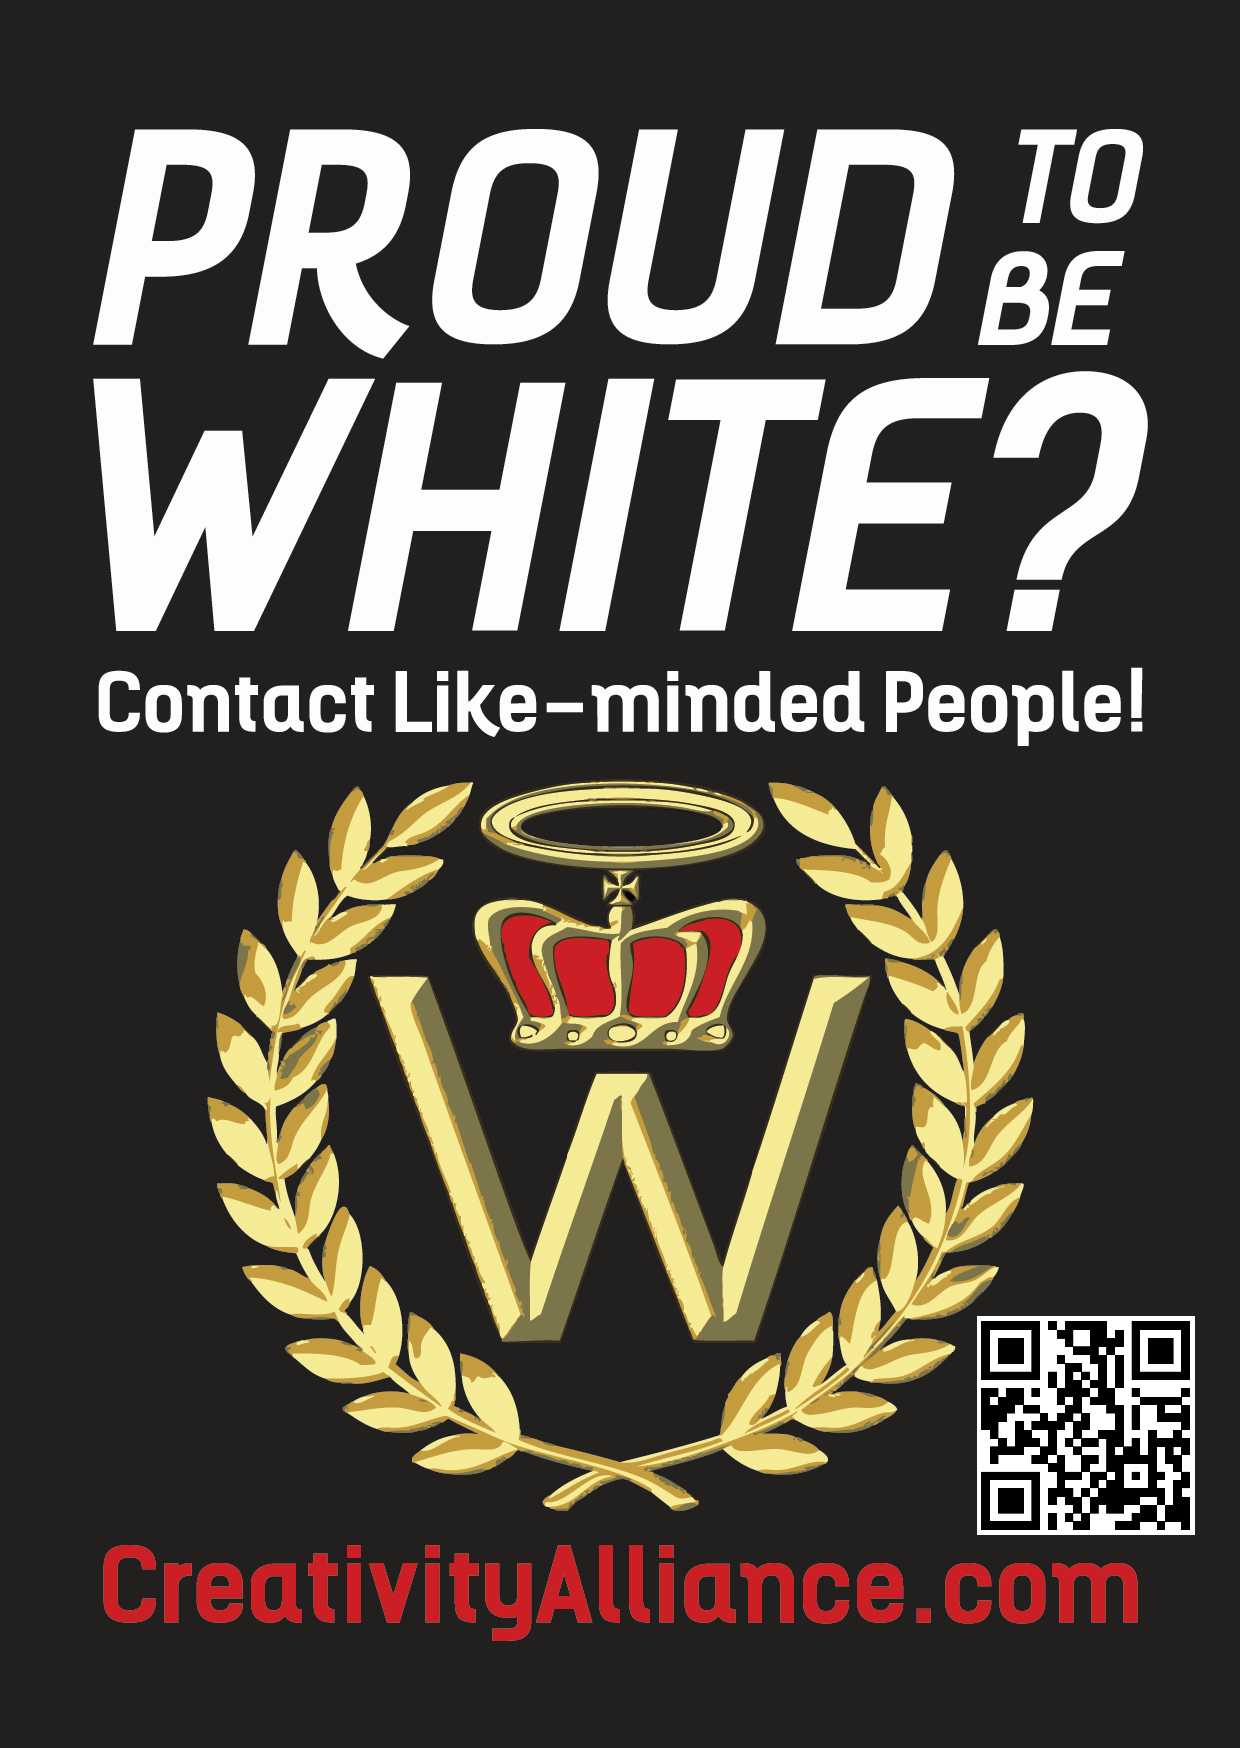 Flyer - Proud to be White?